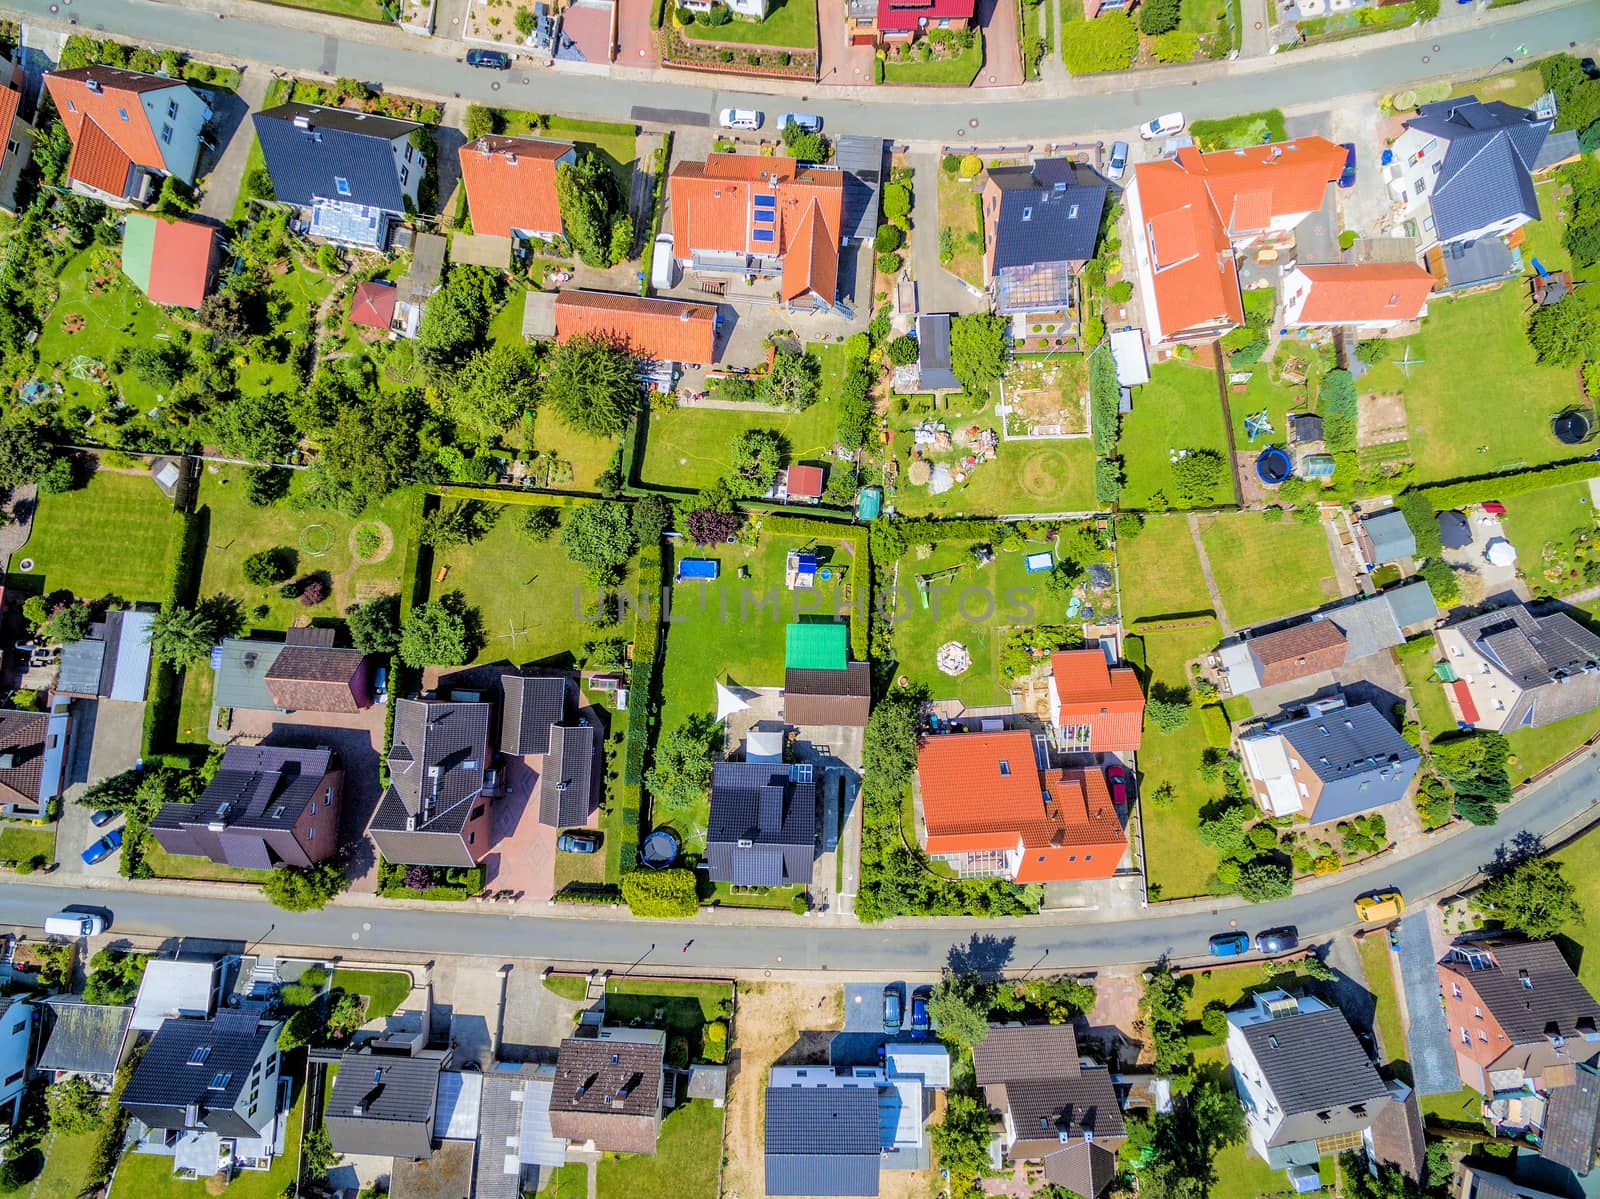 Housing development from houses with gardens. Aerial picture from the bird's-eye view